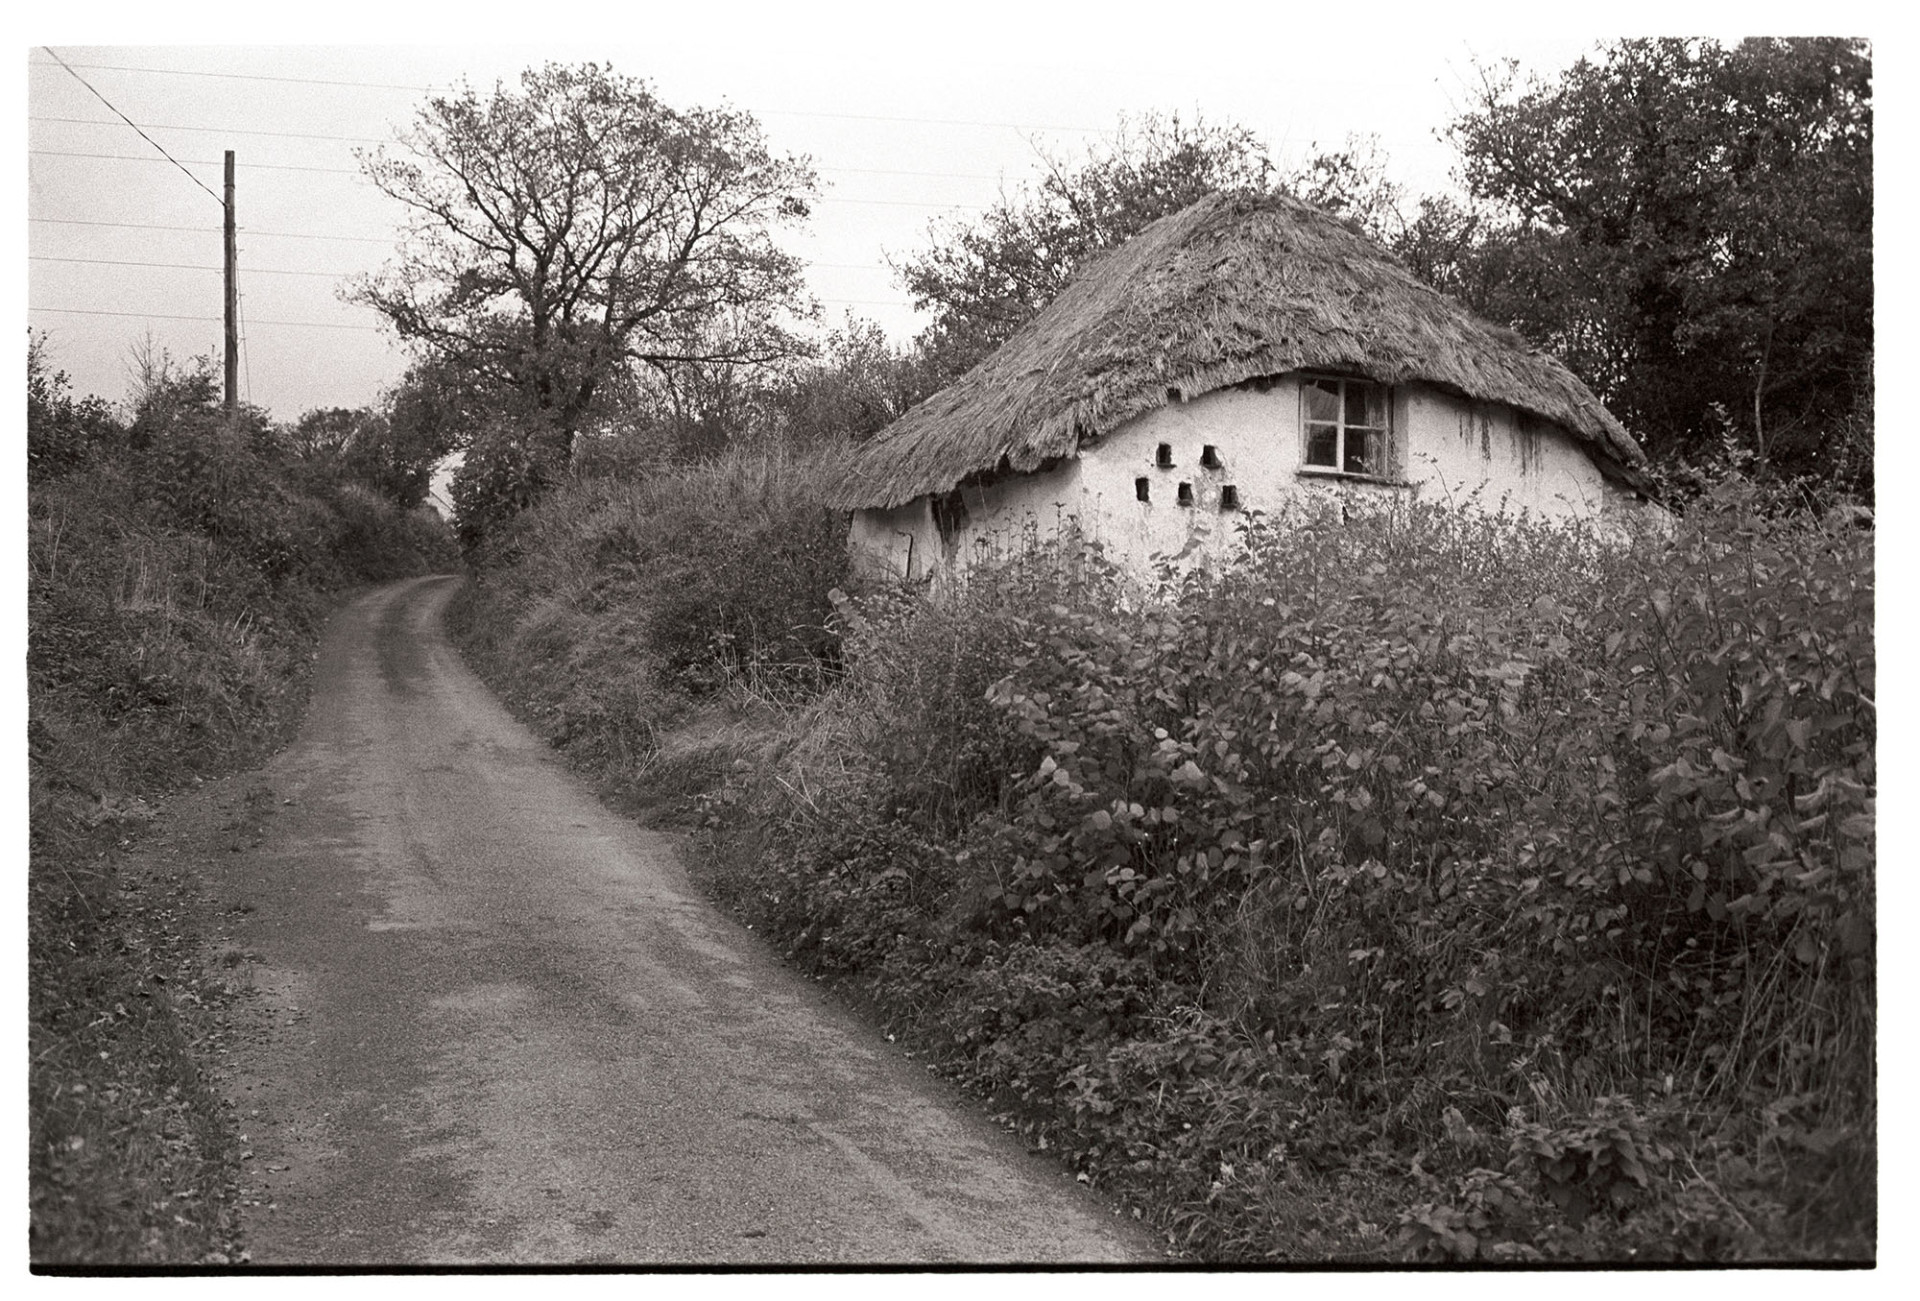 Thatched cottage with dovecote, now demolished.
[A lane running past an overgrown and crumbling cottage with a dovecote near Milton Dammerel.]